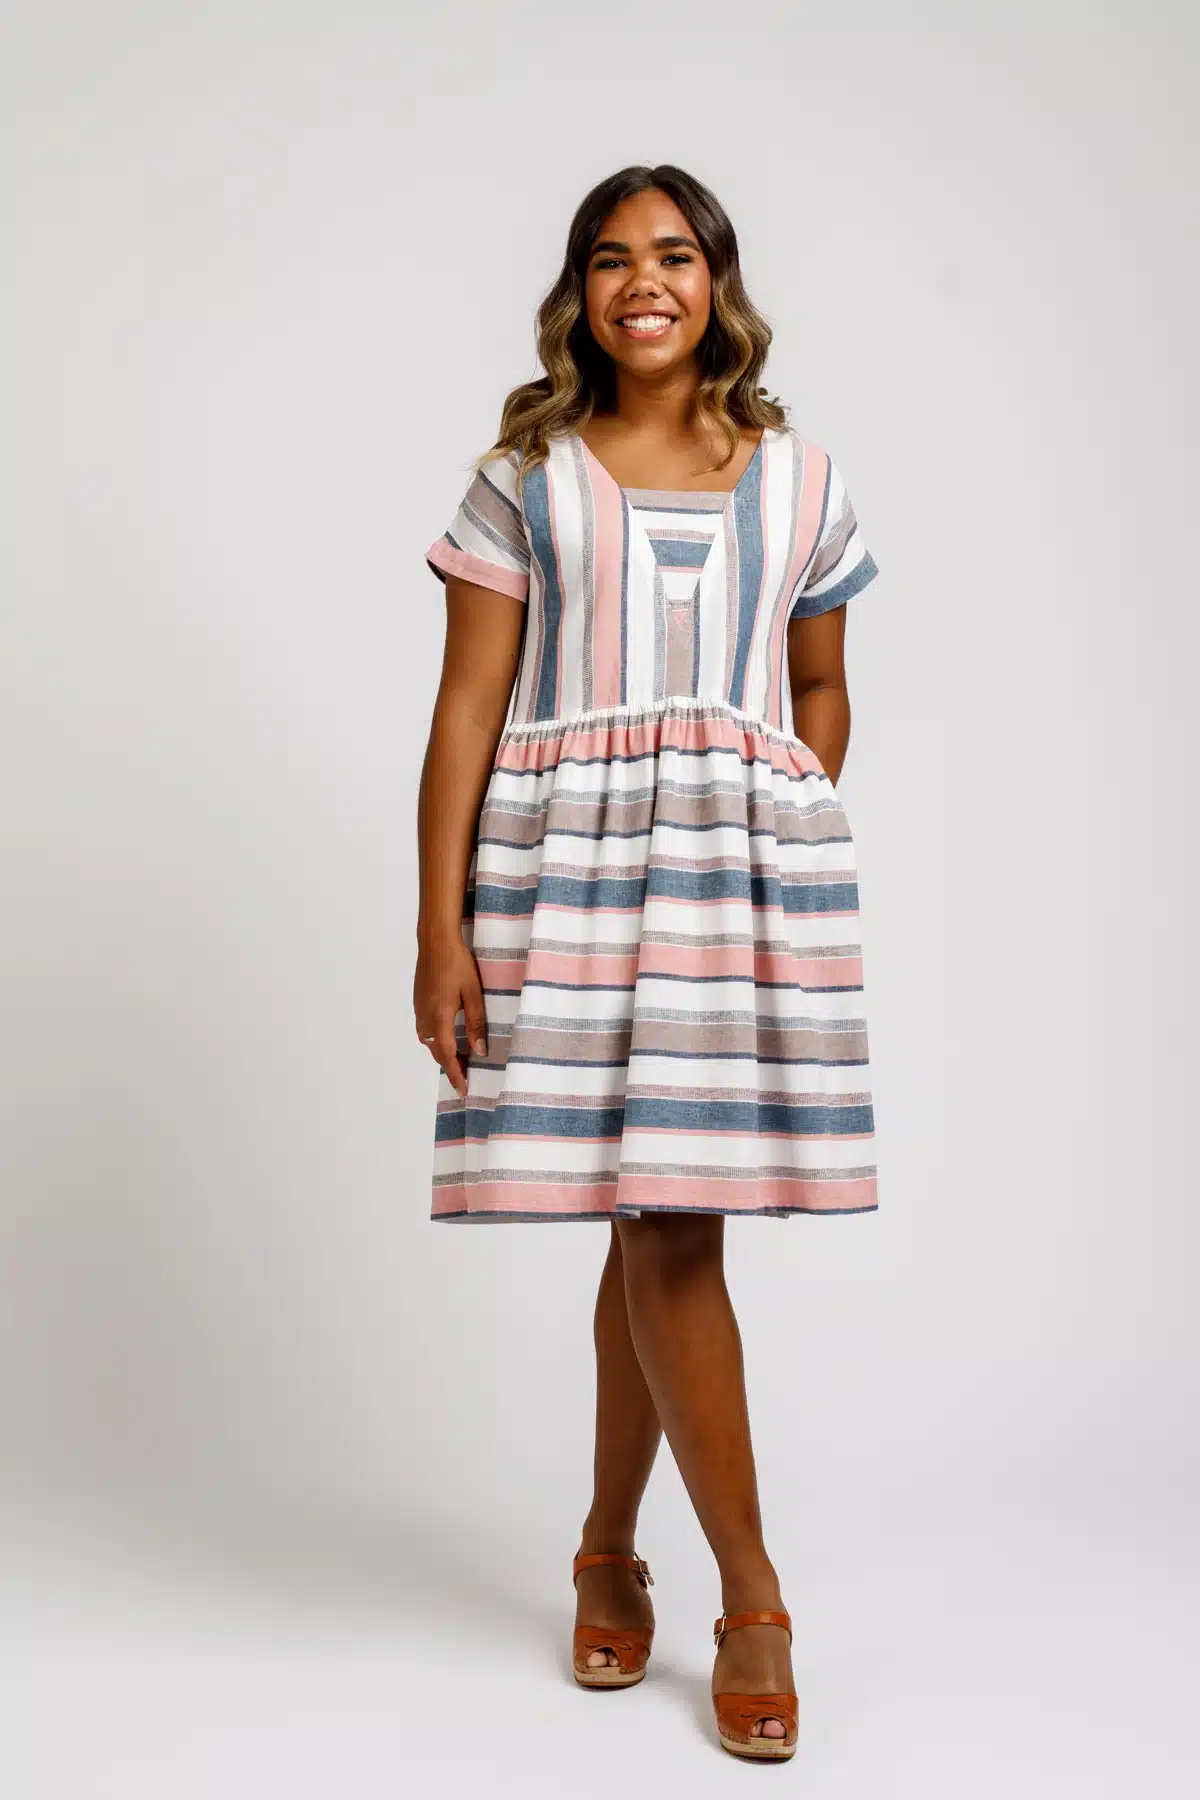 young girl modelling a knee length stripe chambray dress Olive dress pattern by Megan Nielsen